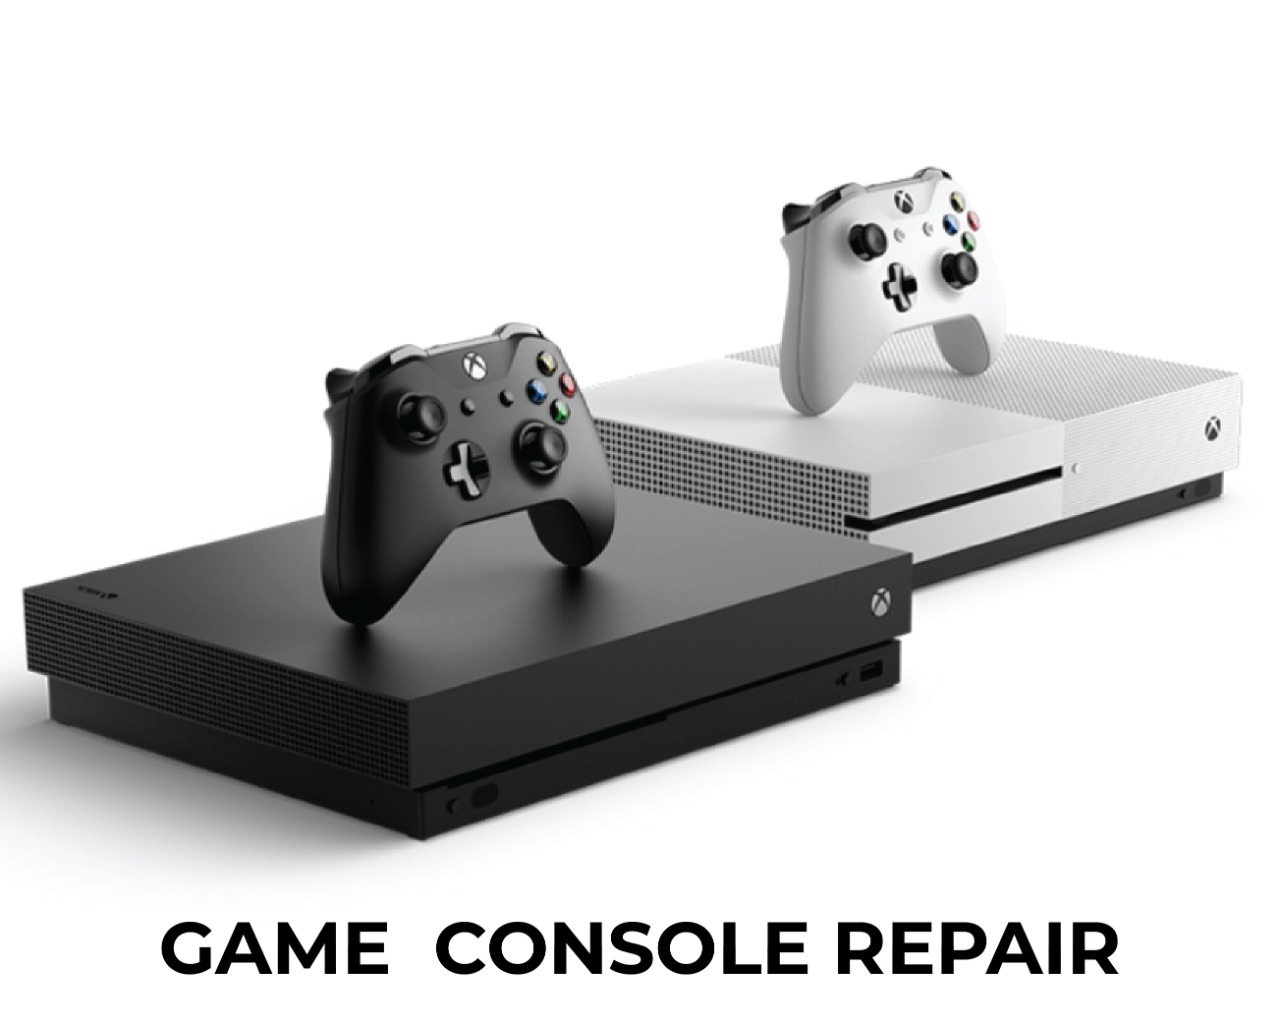 Game Console Repair https://bit.ly/3dVt4W7 by mygadgetmd